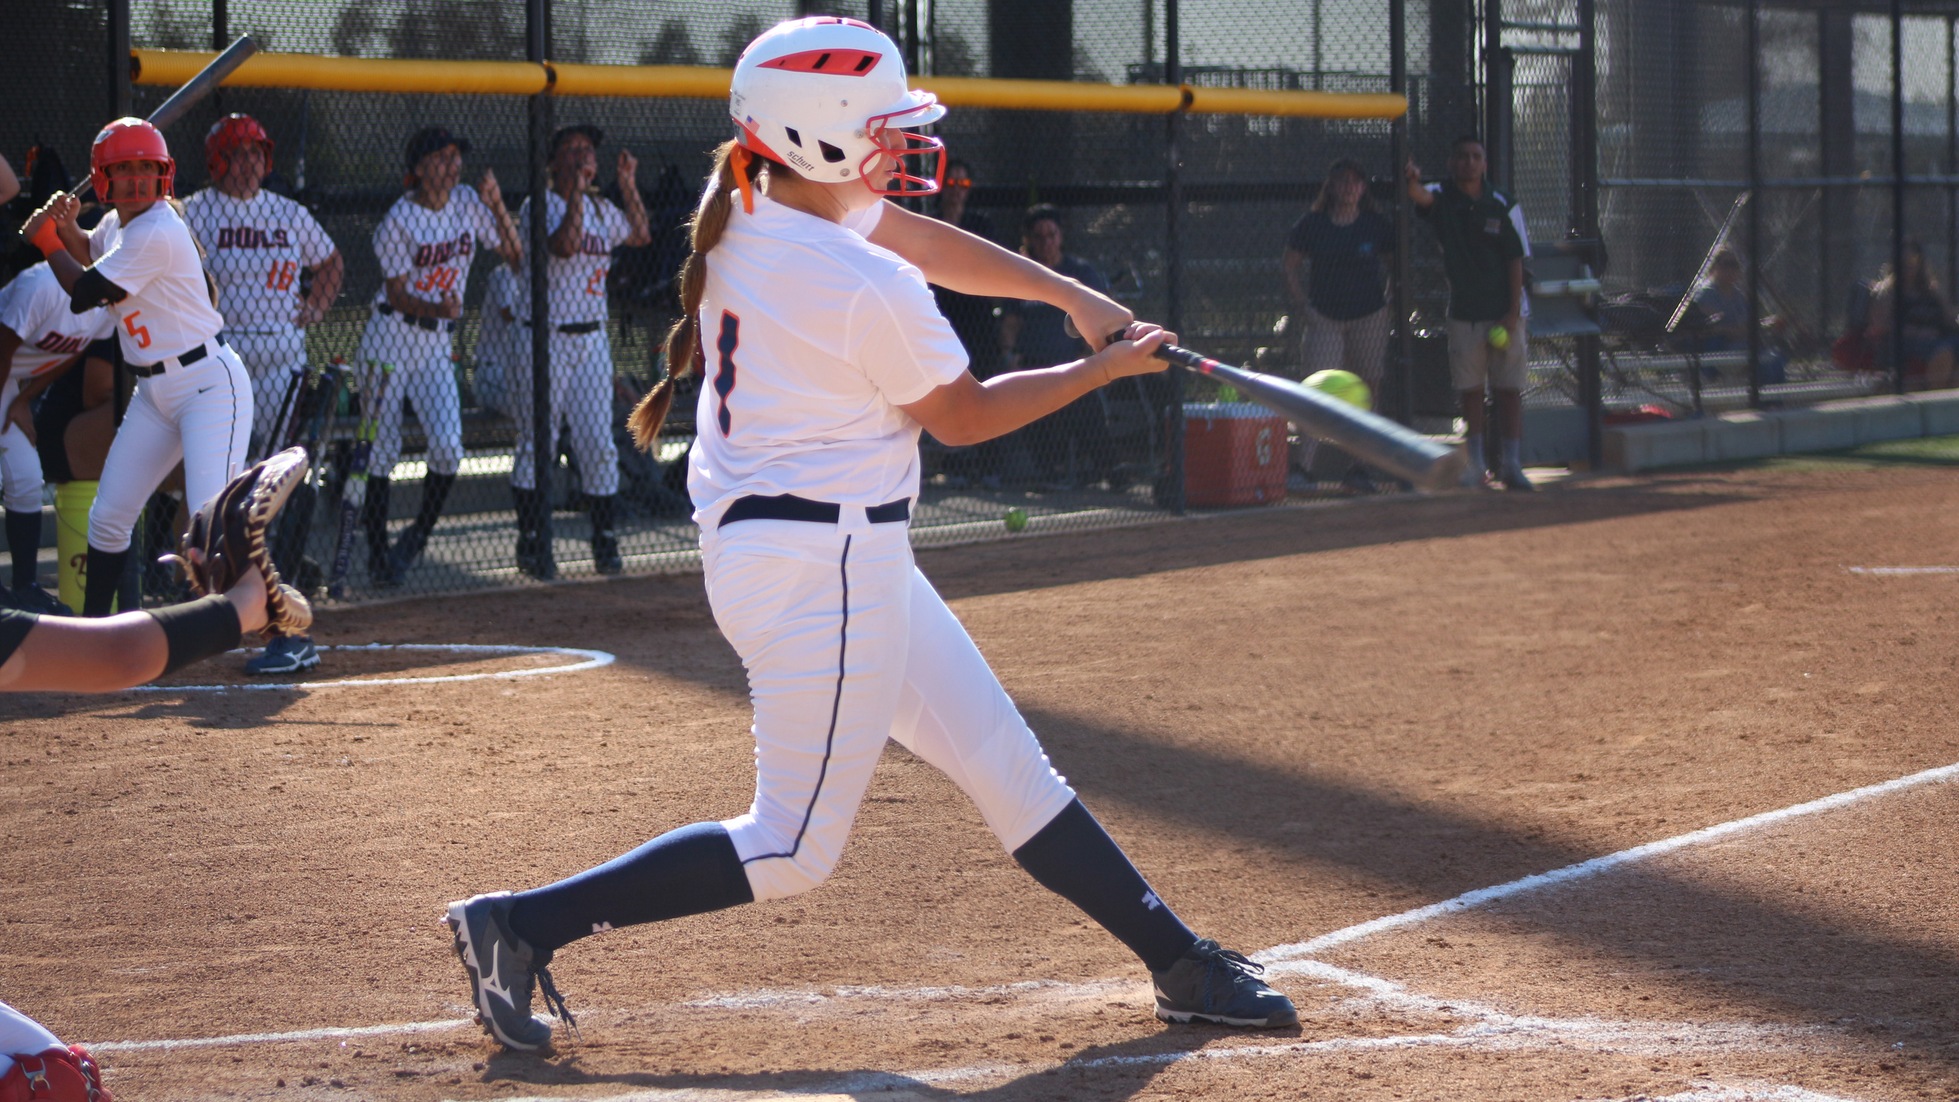 Alexis Cordero hits the ball for the Owls. Photo by: Brianna Jara.